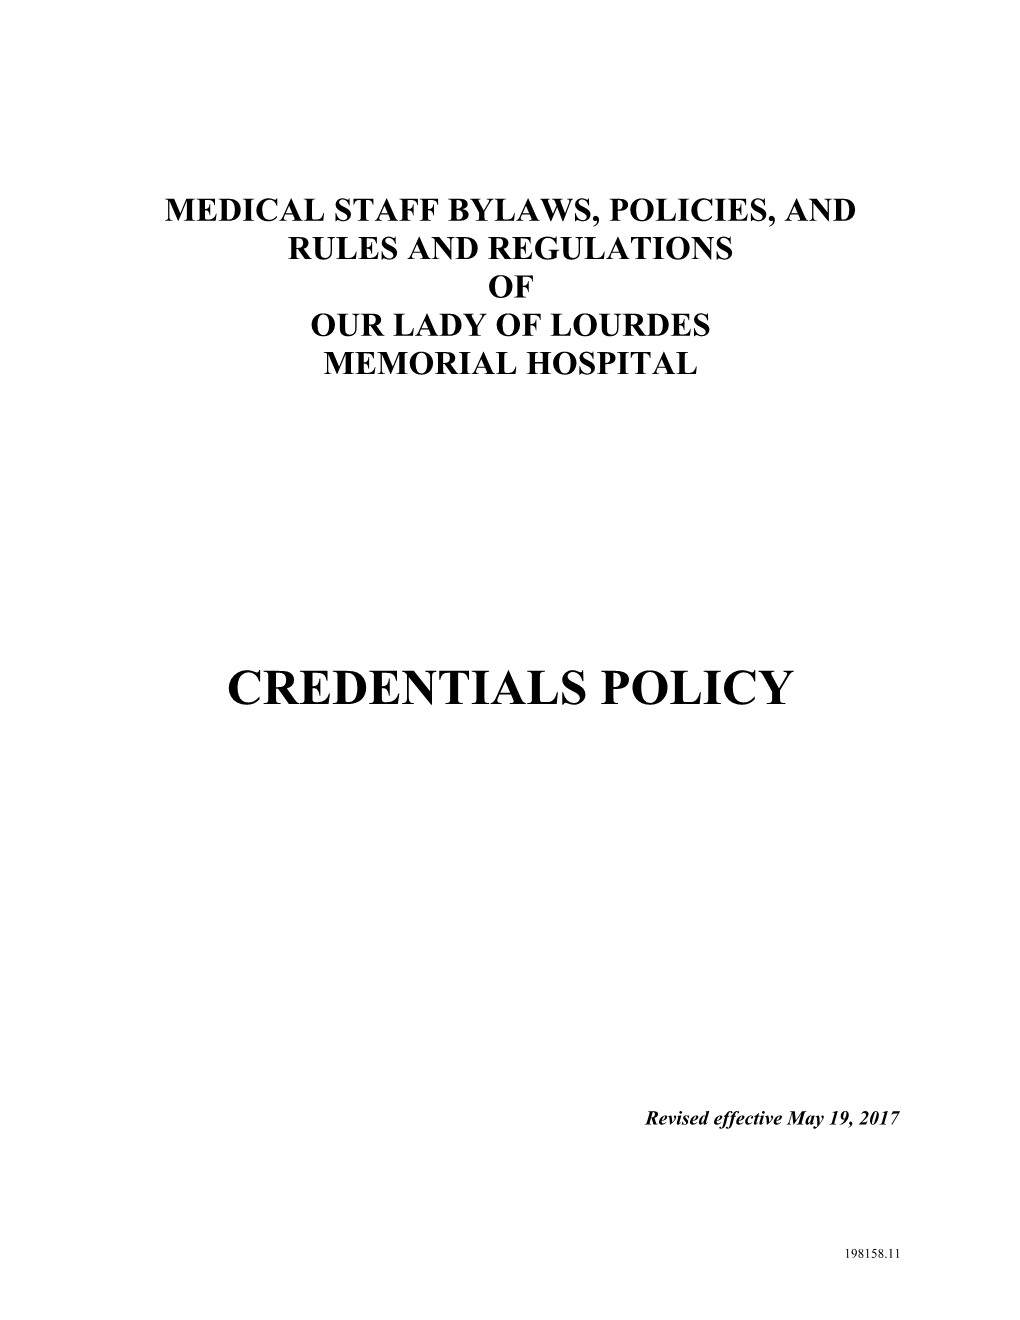 Medical Staff Bylaws, Policies, And